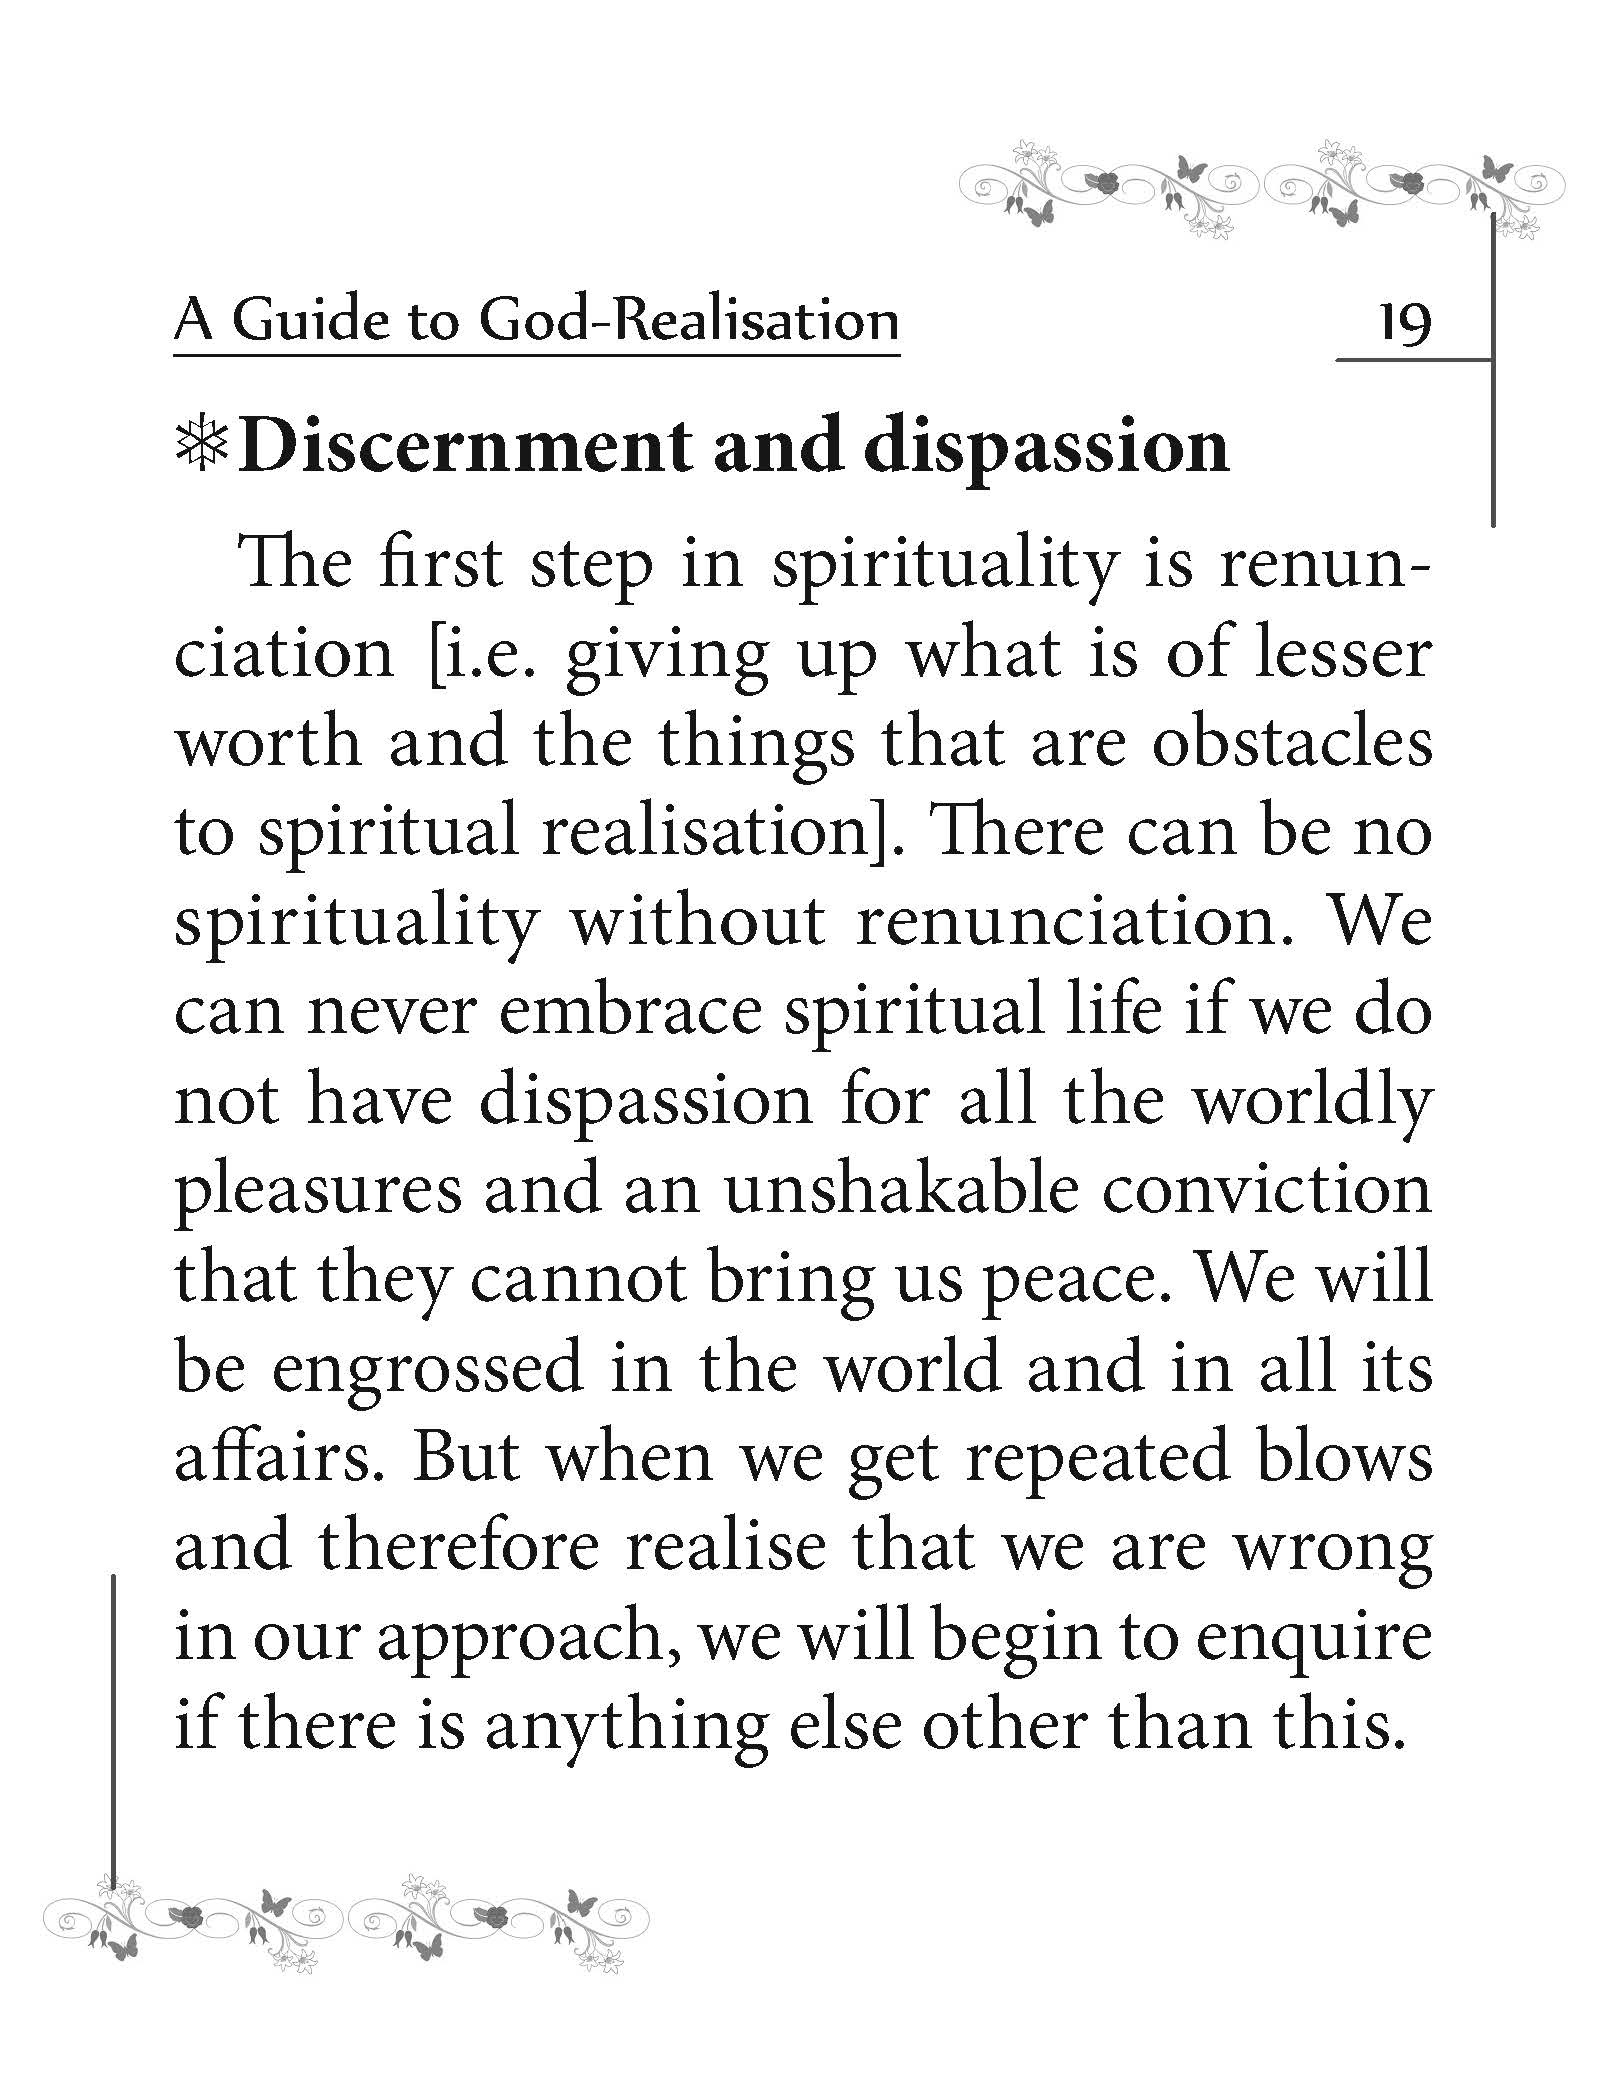 A Guide to God-Realisation